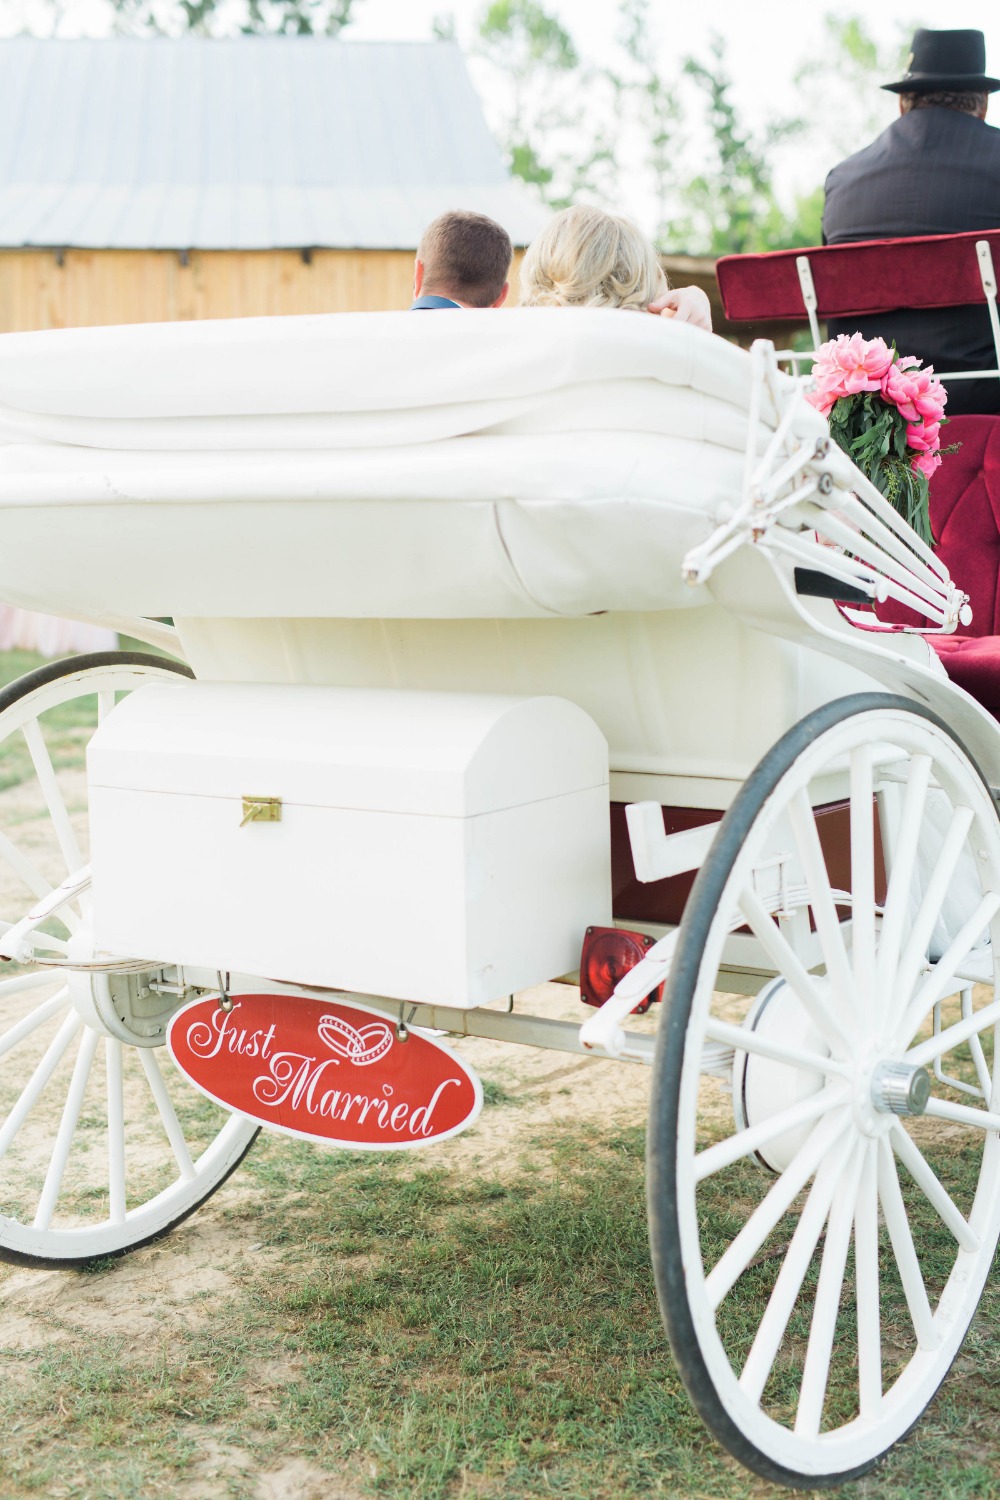 Just married carriage sign